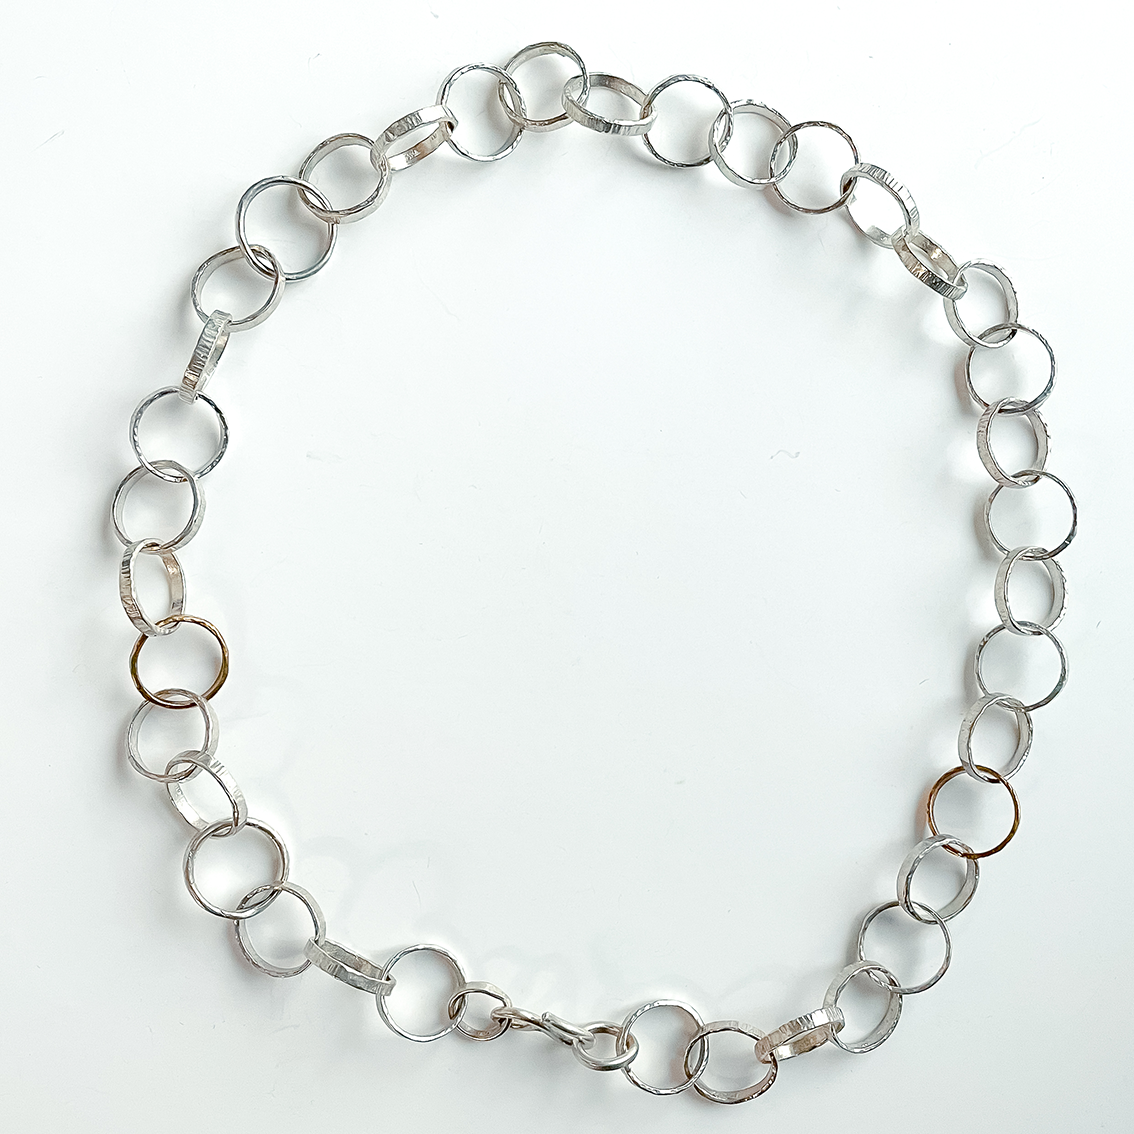 Image of the 63.5cm chain necklace shown in a circle